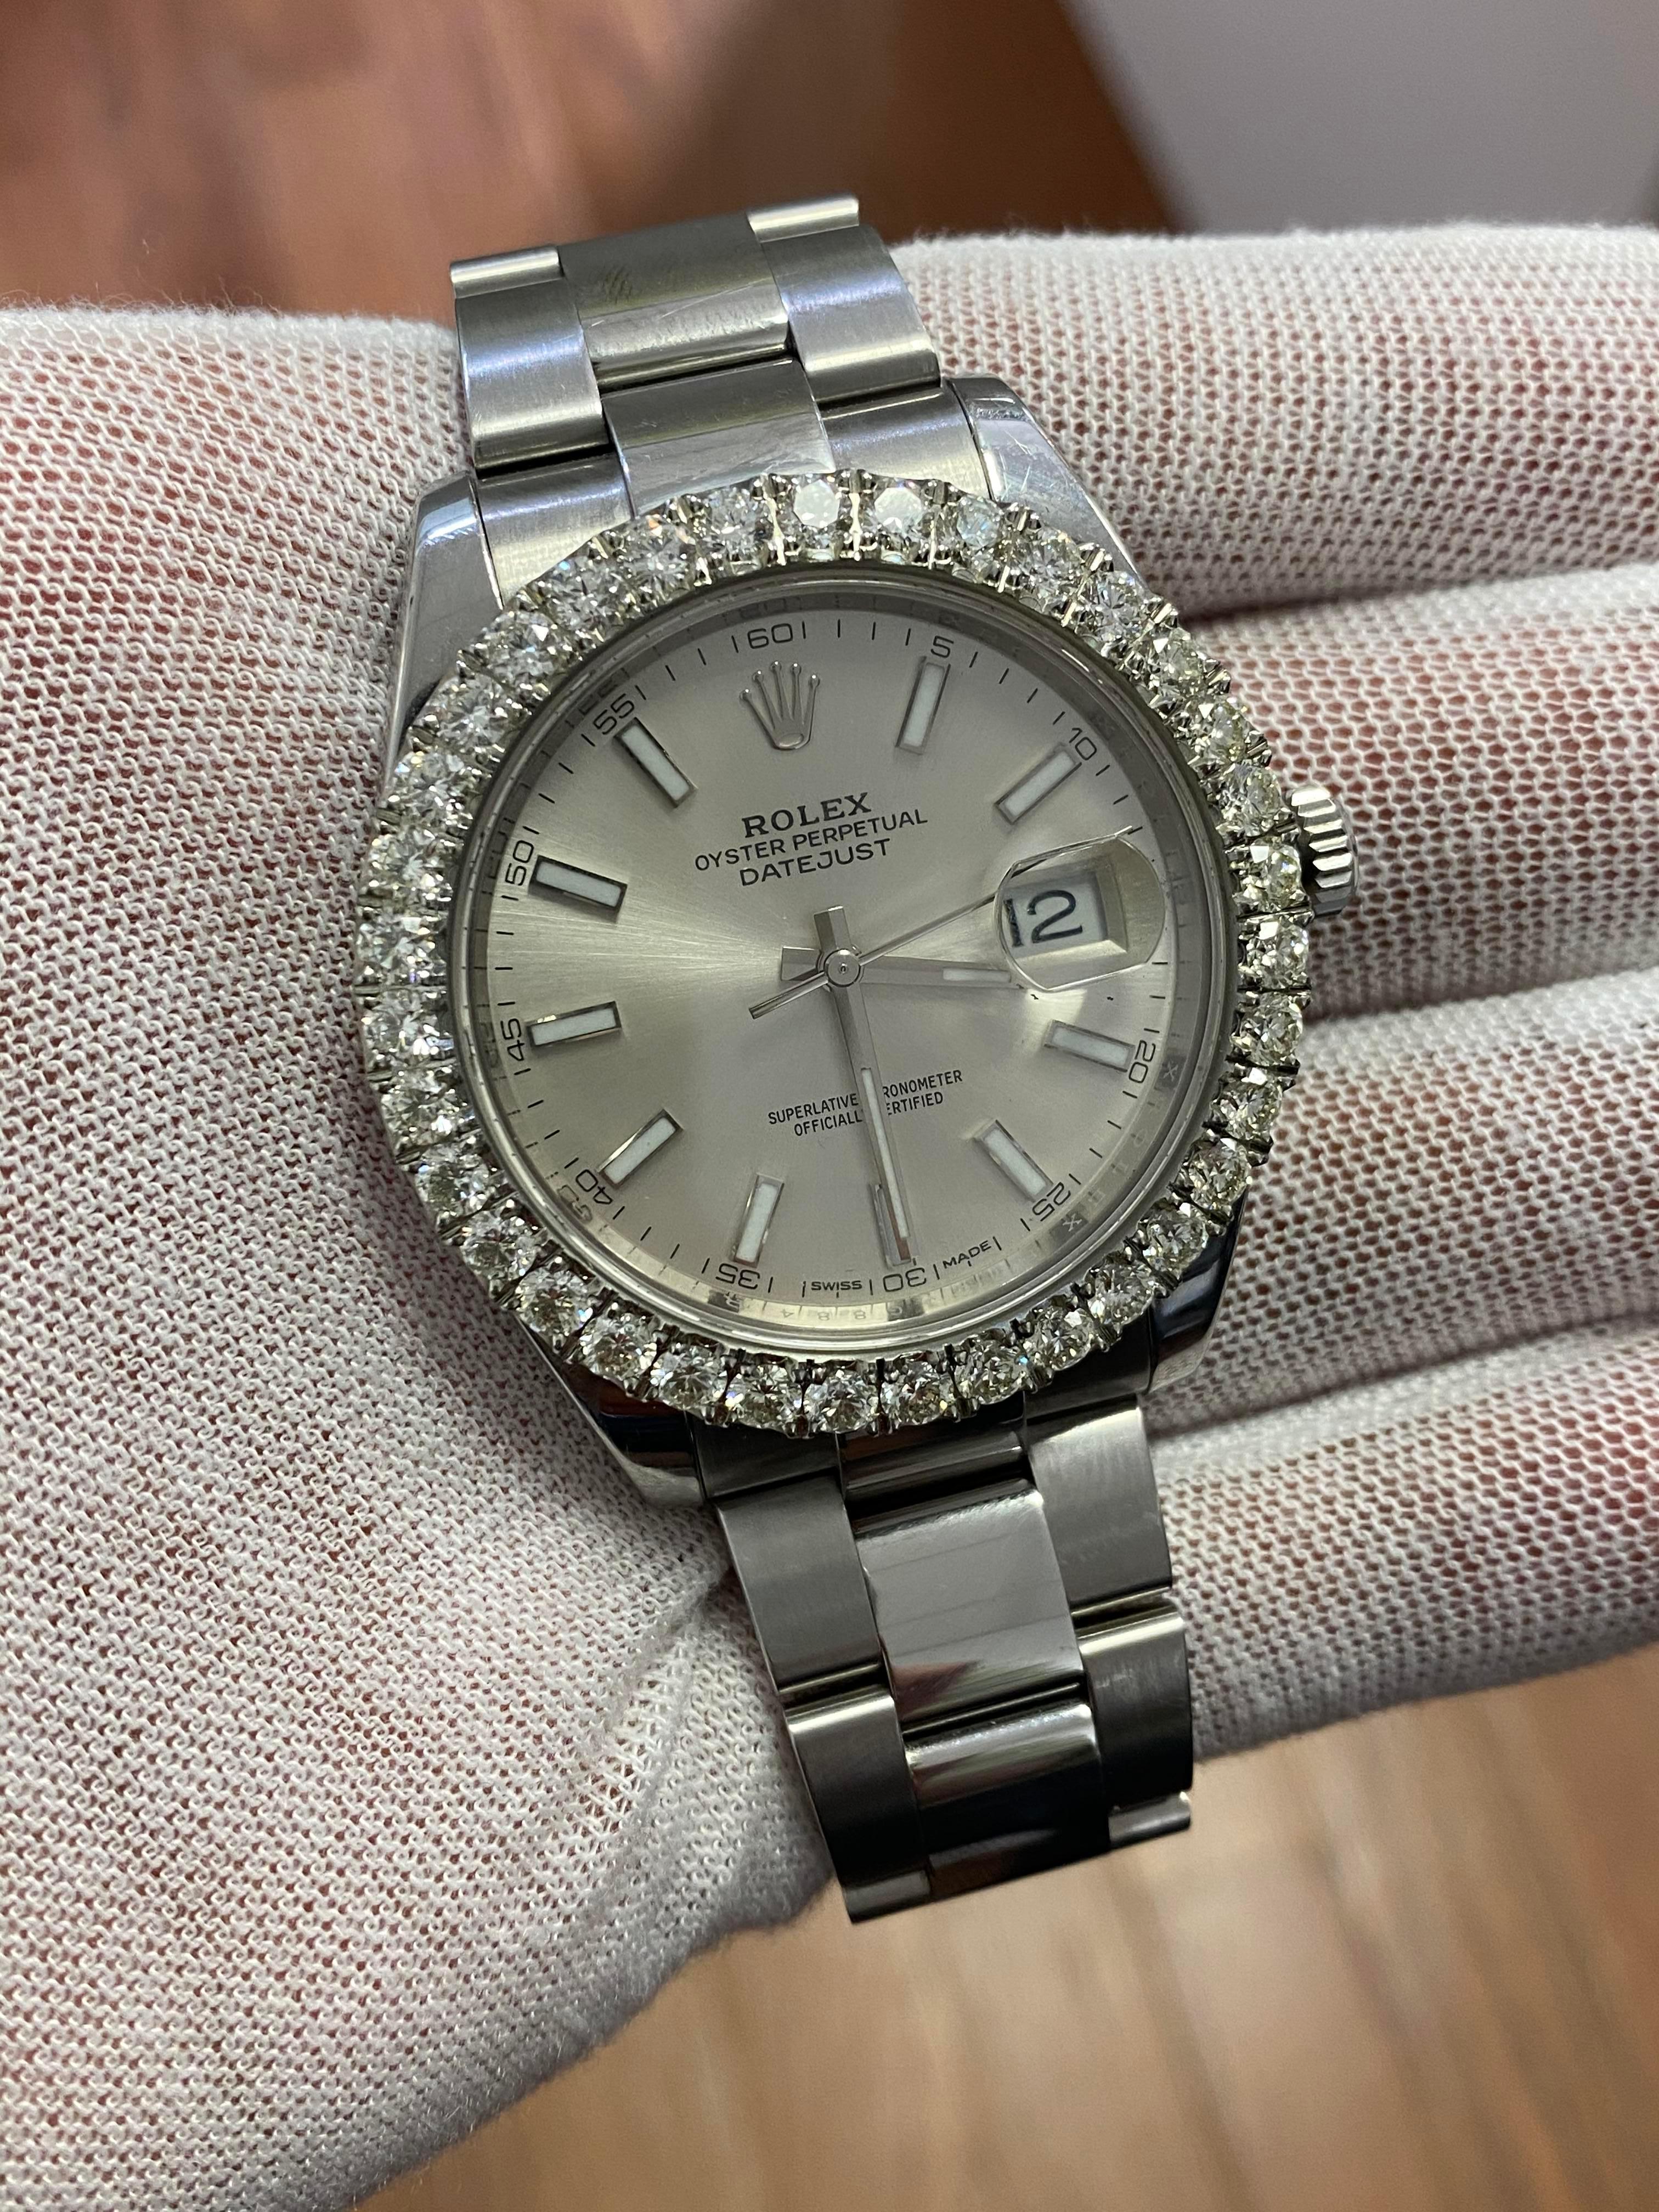 Brand: Rolex
Model: Datejust
Model number: 126300
Size: 41mm
Movement: Automatic
Case Material: Steel
Bracelet Material: Steel
Gender: Men's watch/Unisex 
 Movement: Automatic 

Diamond dial: 4.50cwt diamonds.  VVS clarity. H color. 100% natural